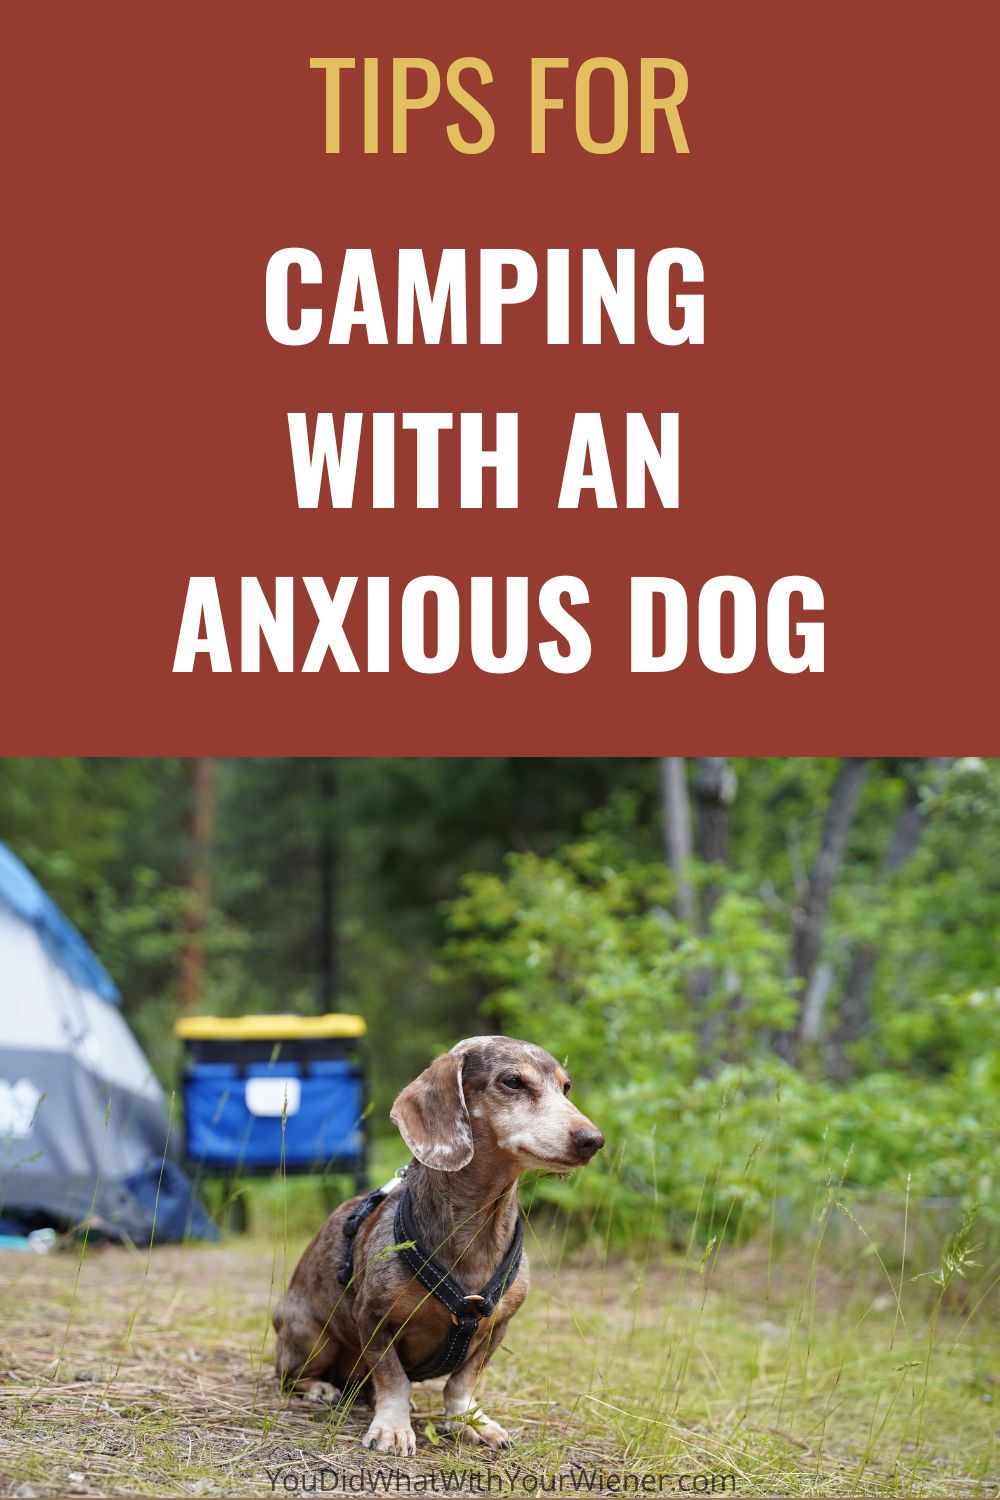 Do you want to go camping with a dog who's anxious? Here are some tips for camping with an anxious dog that you'll want to read.